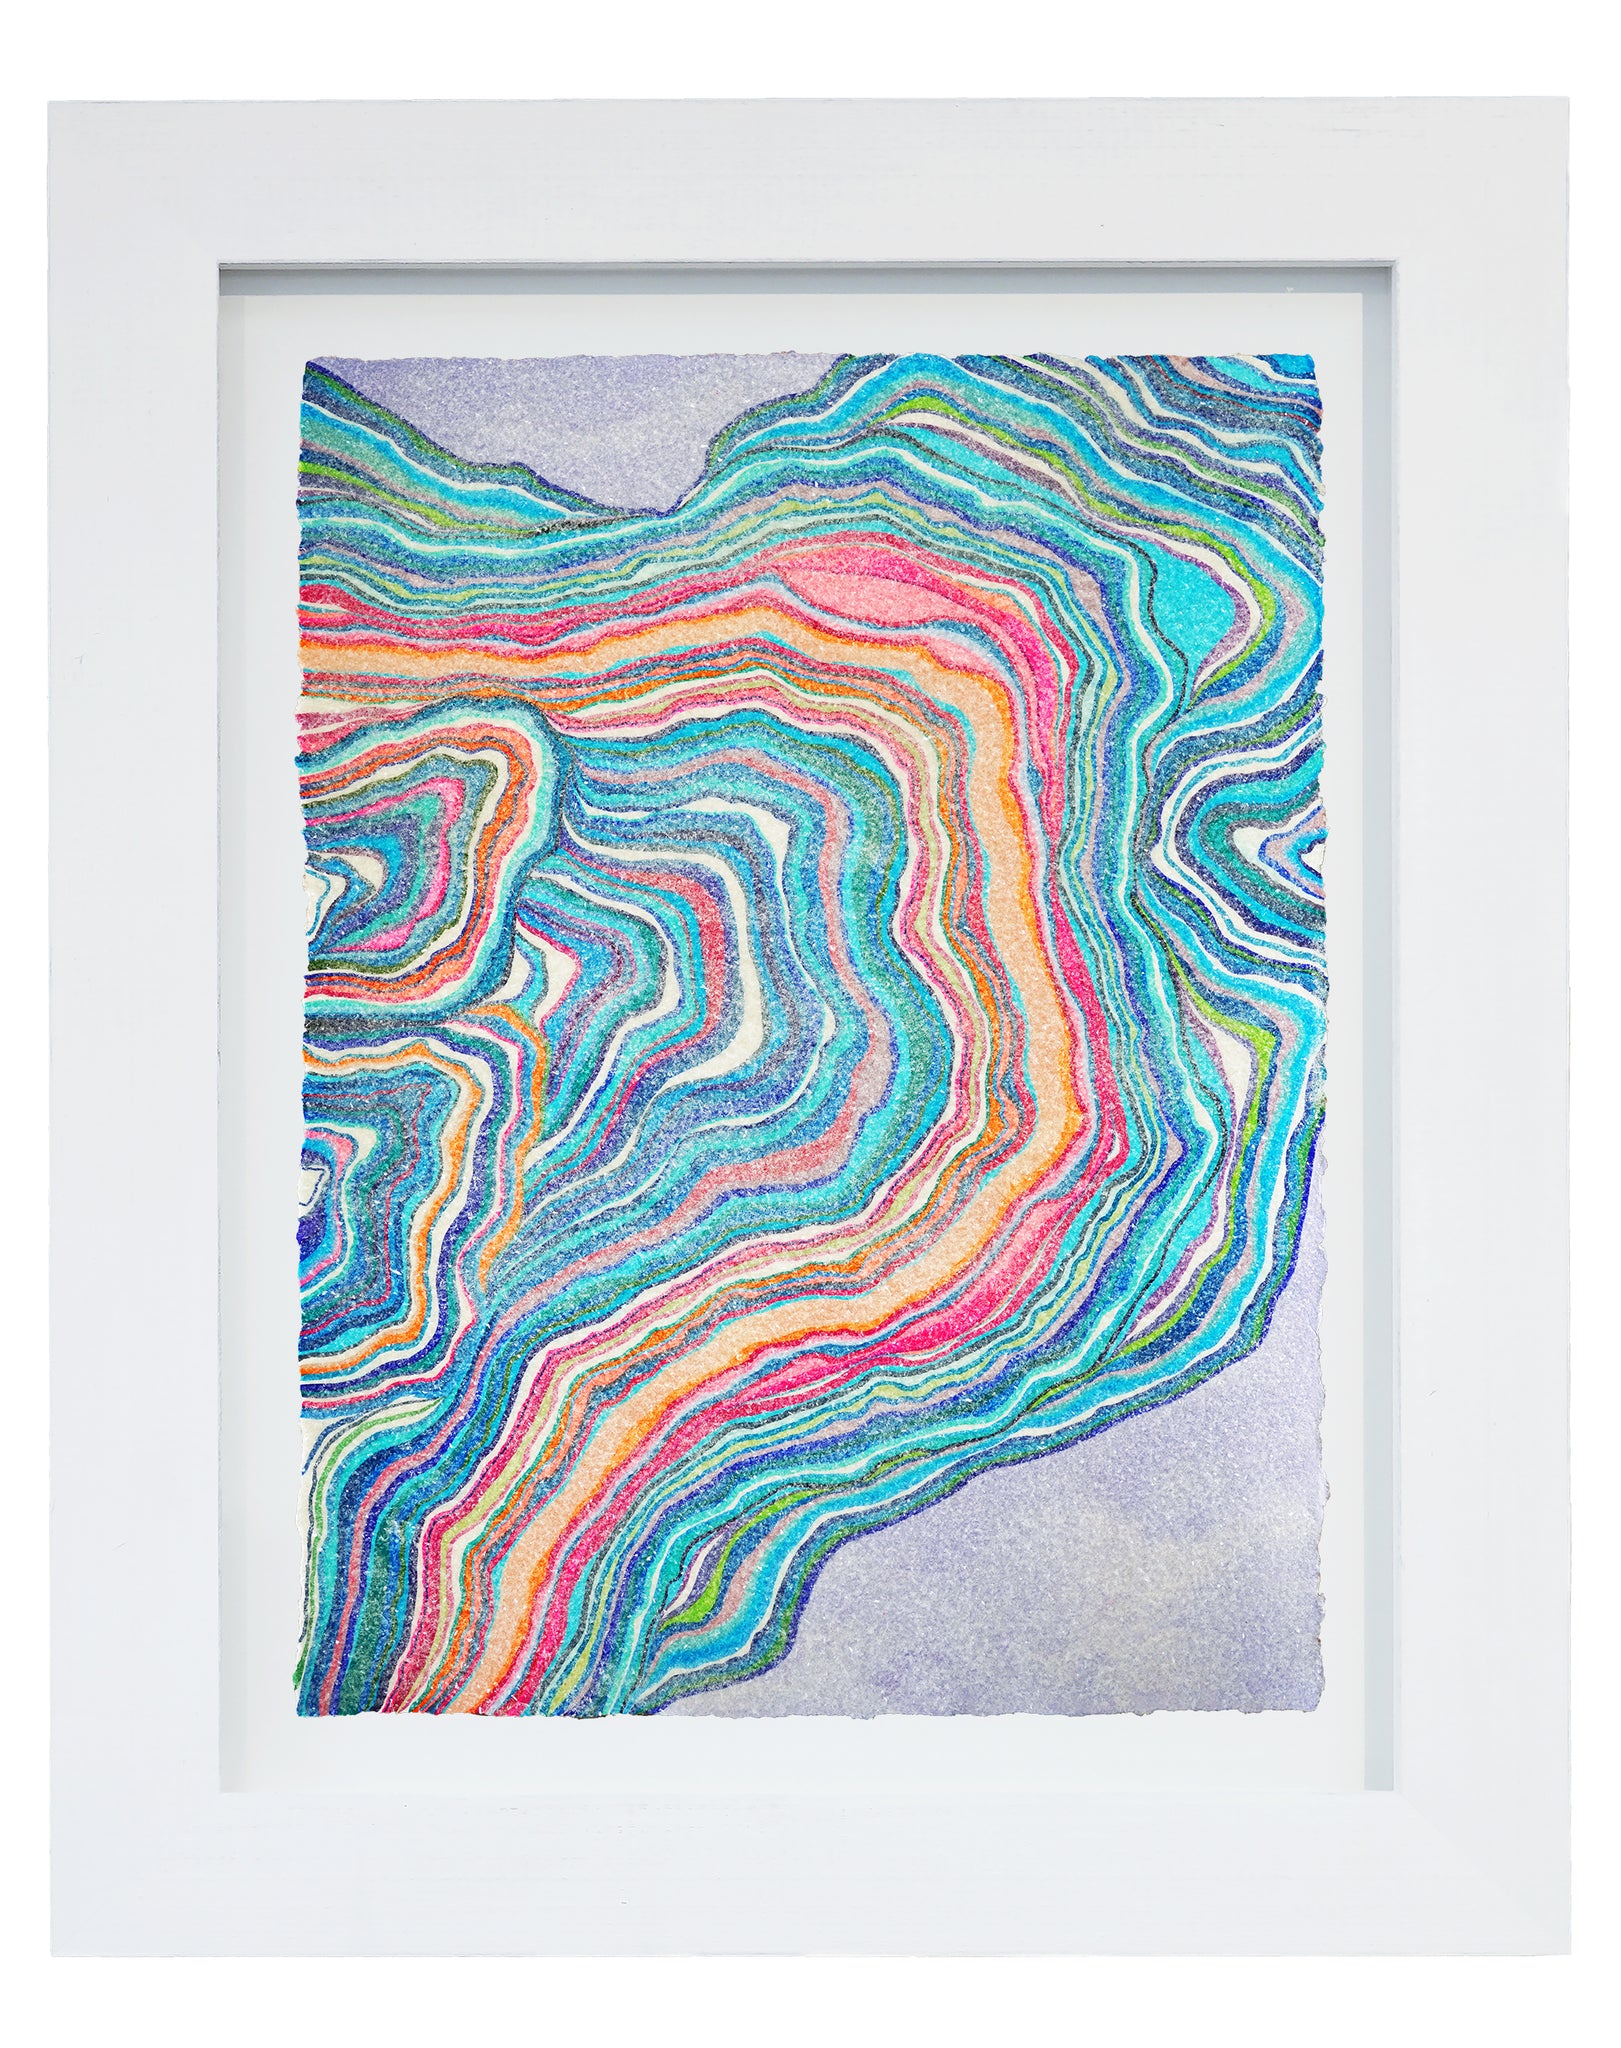 Lineation No. 38 -36" X 28" Framed